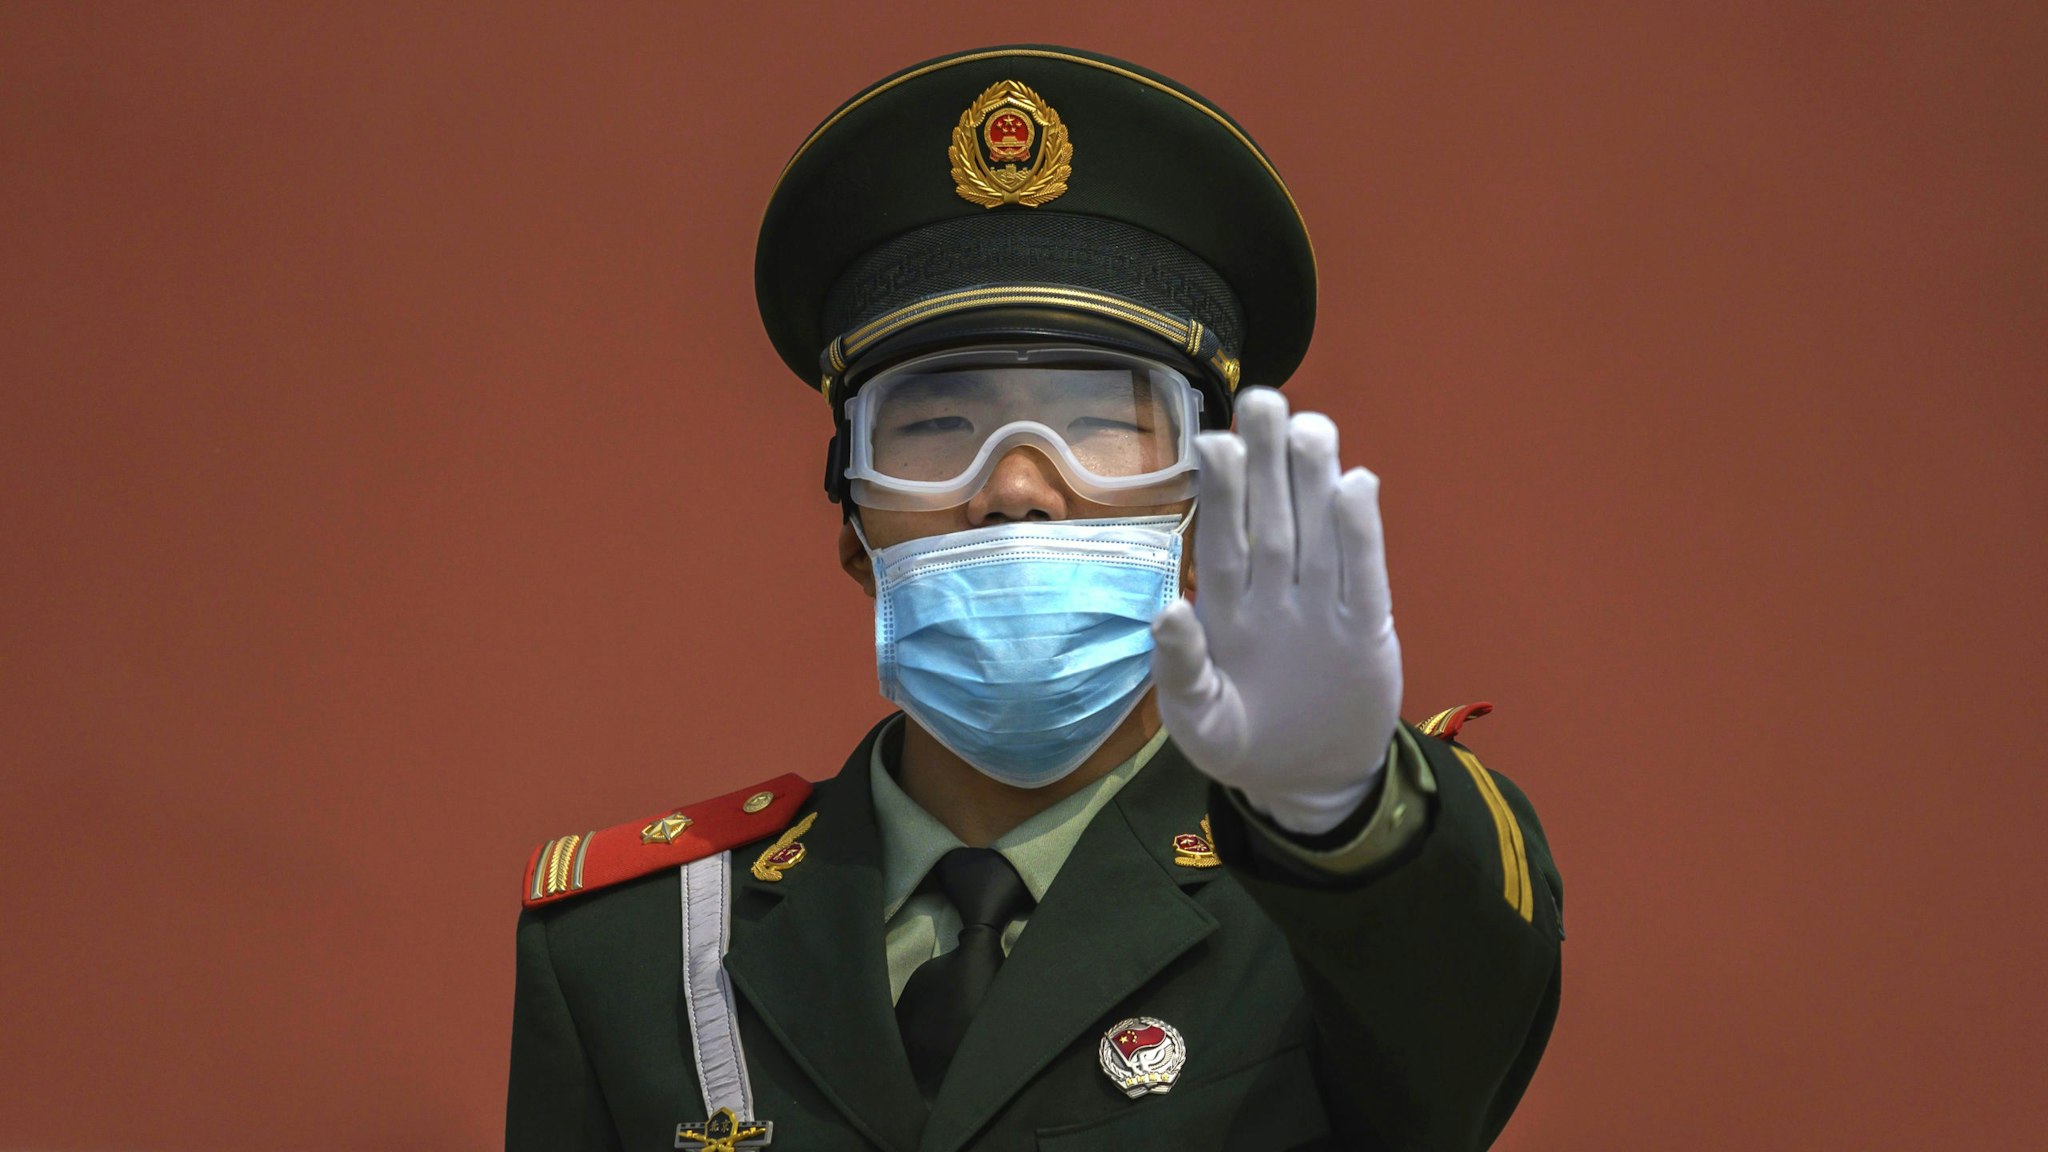 BEIJING, CHINA - MAY 01: A Chinese paramilitary police officer gestures as he wears a protective mask while standing guard at the entrance to the Forbidden City as it re-opened to limited visitors for the May holiday, on May 1, 2020 in Beijing, China. Beijing lowered its risk level after more than three months Thursday in advance of the May holiday, allowing most domestic travellers arriving in the city to do so without having to do 14 days quarantine. The Forbidden City opened to a limited number of visitors Friday morning for the first time in more than three months. After decades of growth, officials said China's economy had shrunk in the latest quarter due to the impact of the coronavirus epidemic. The slump in the worlds second largest economy is regarded as a sign of difficult times ahead for the global economy. While industrial sectors in China are showing signs of reviving production, a majority of private companies are operating at only 50% capacity, according to analysts. With the pandemic hitting hard across the world, officially the number of coronavirus cases in China is dwindling, ever since the government imposed sweeping measures to keep the disease from spreading. Officials believe the worst appears to be over in China, though there are concerns of another wave of infections as the government attempts to reboot the worlds second largest economy. Since January, China has recorded more than 81,000 cases of COVID-19 and at least 3200 deaths, mostly in and around the city of Wuhan, in central Hubei province, where the outbreak first started.